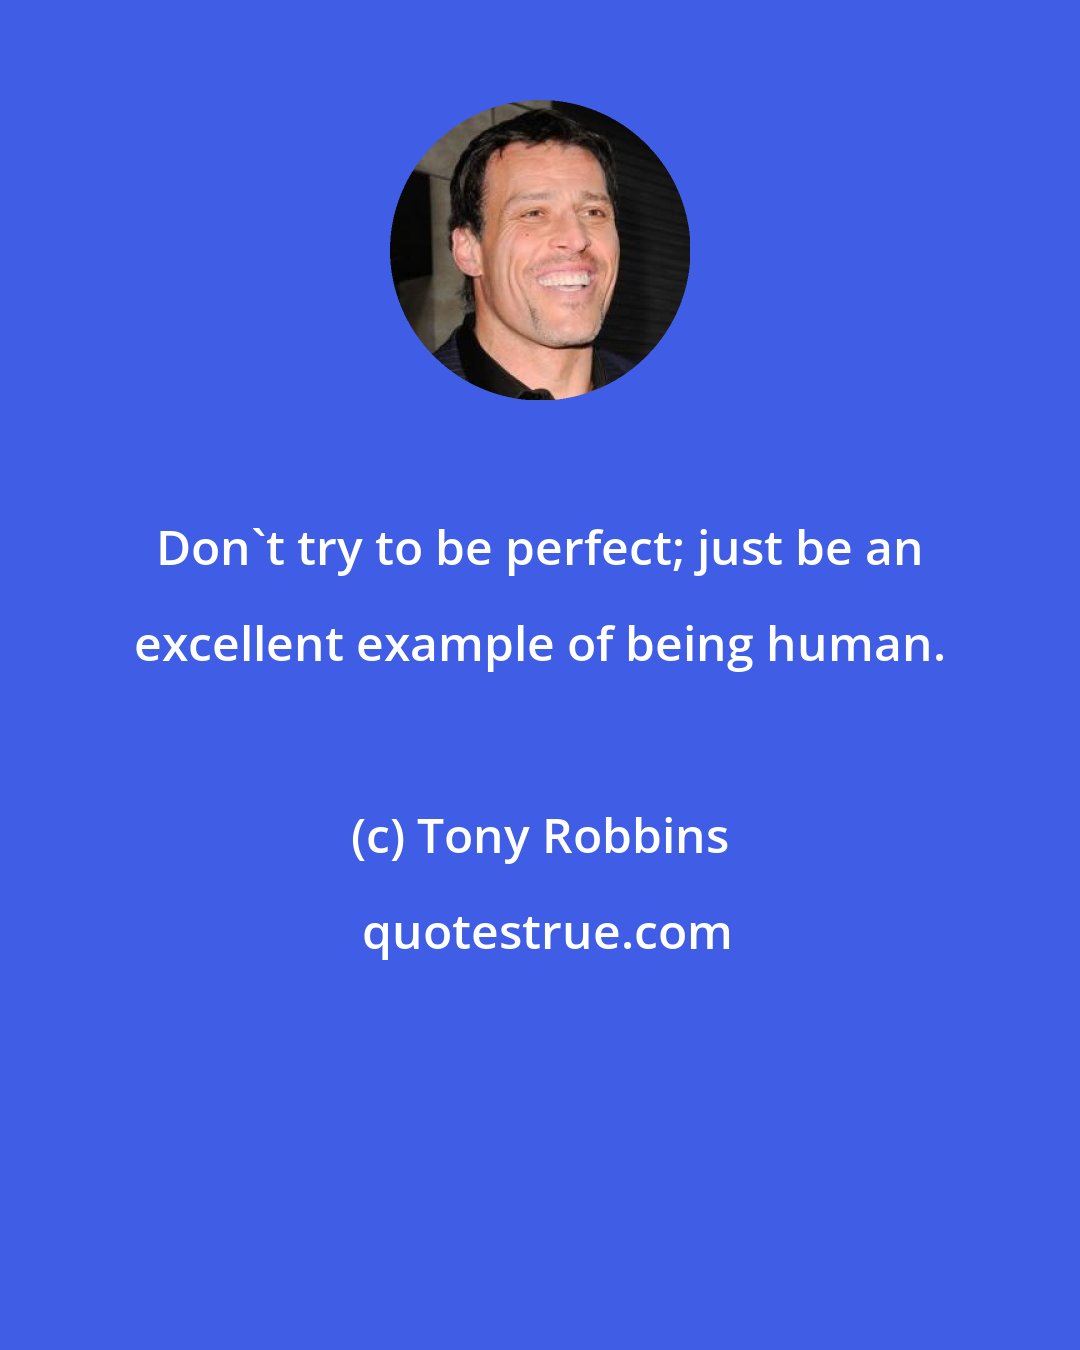 Tony Robbins: Don't try to be perfect; just be an excellent example of being human.